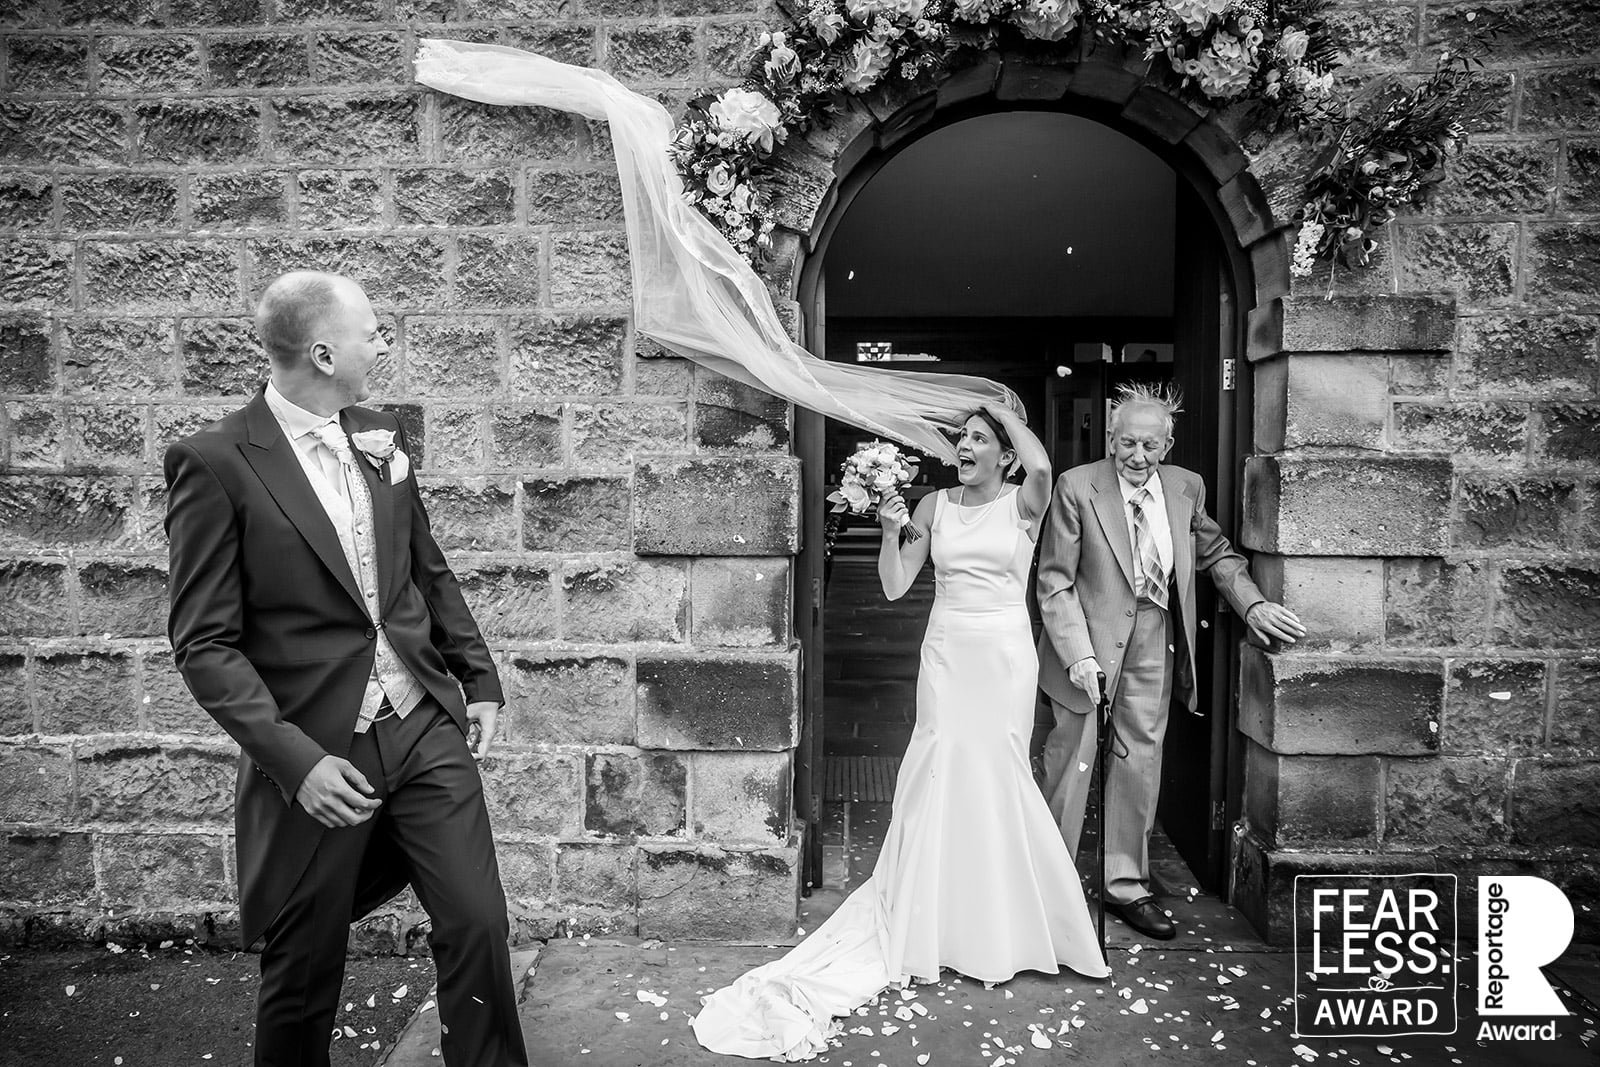 The brides vail is almost swept away by the wind as she exits the church